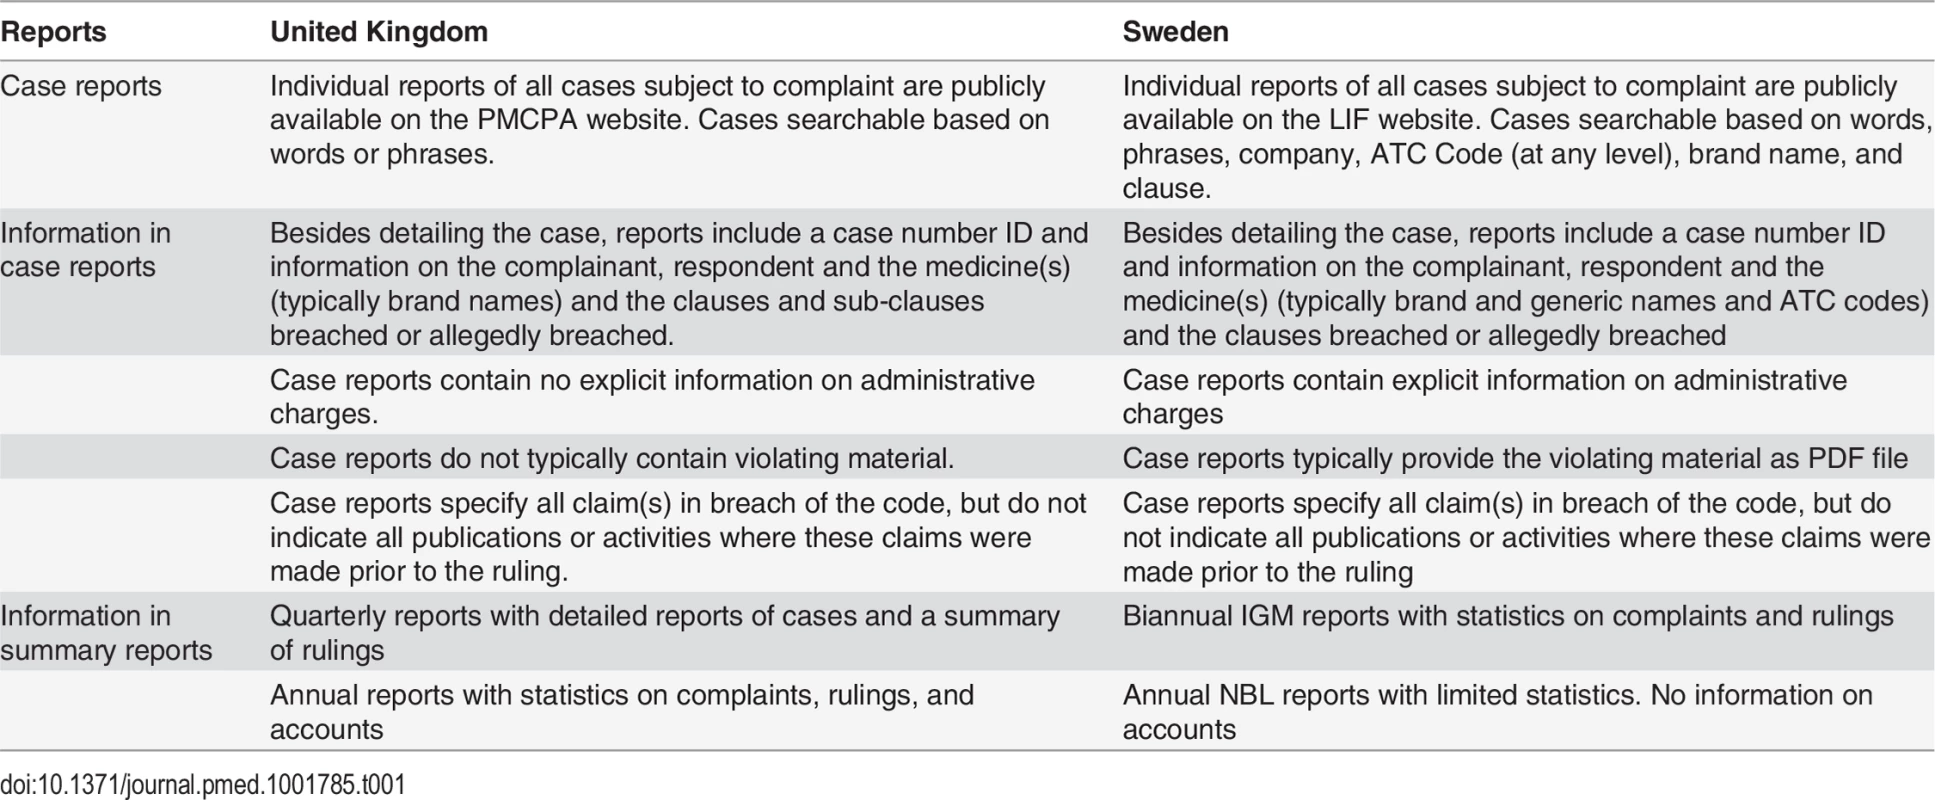 Information from self-regulatory bodies in the UK and Sweden.